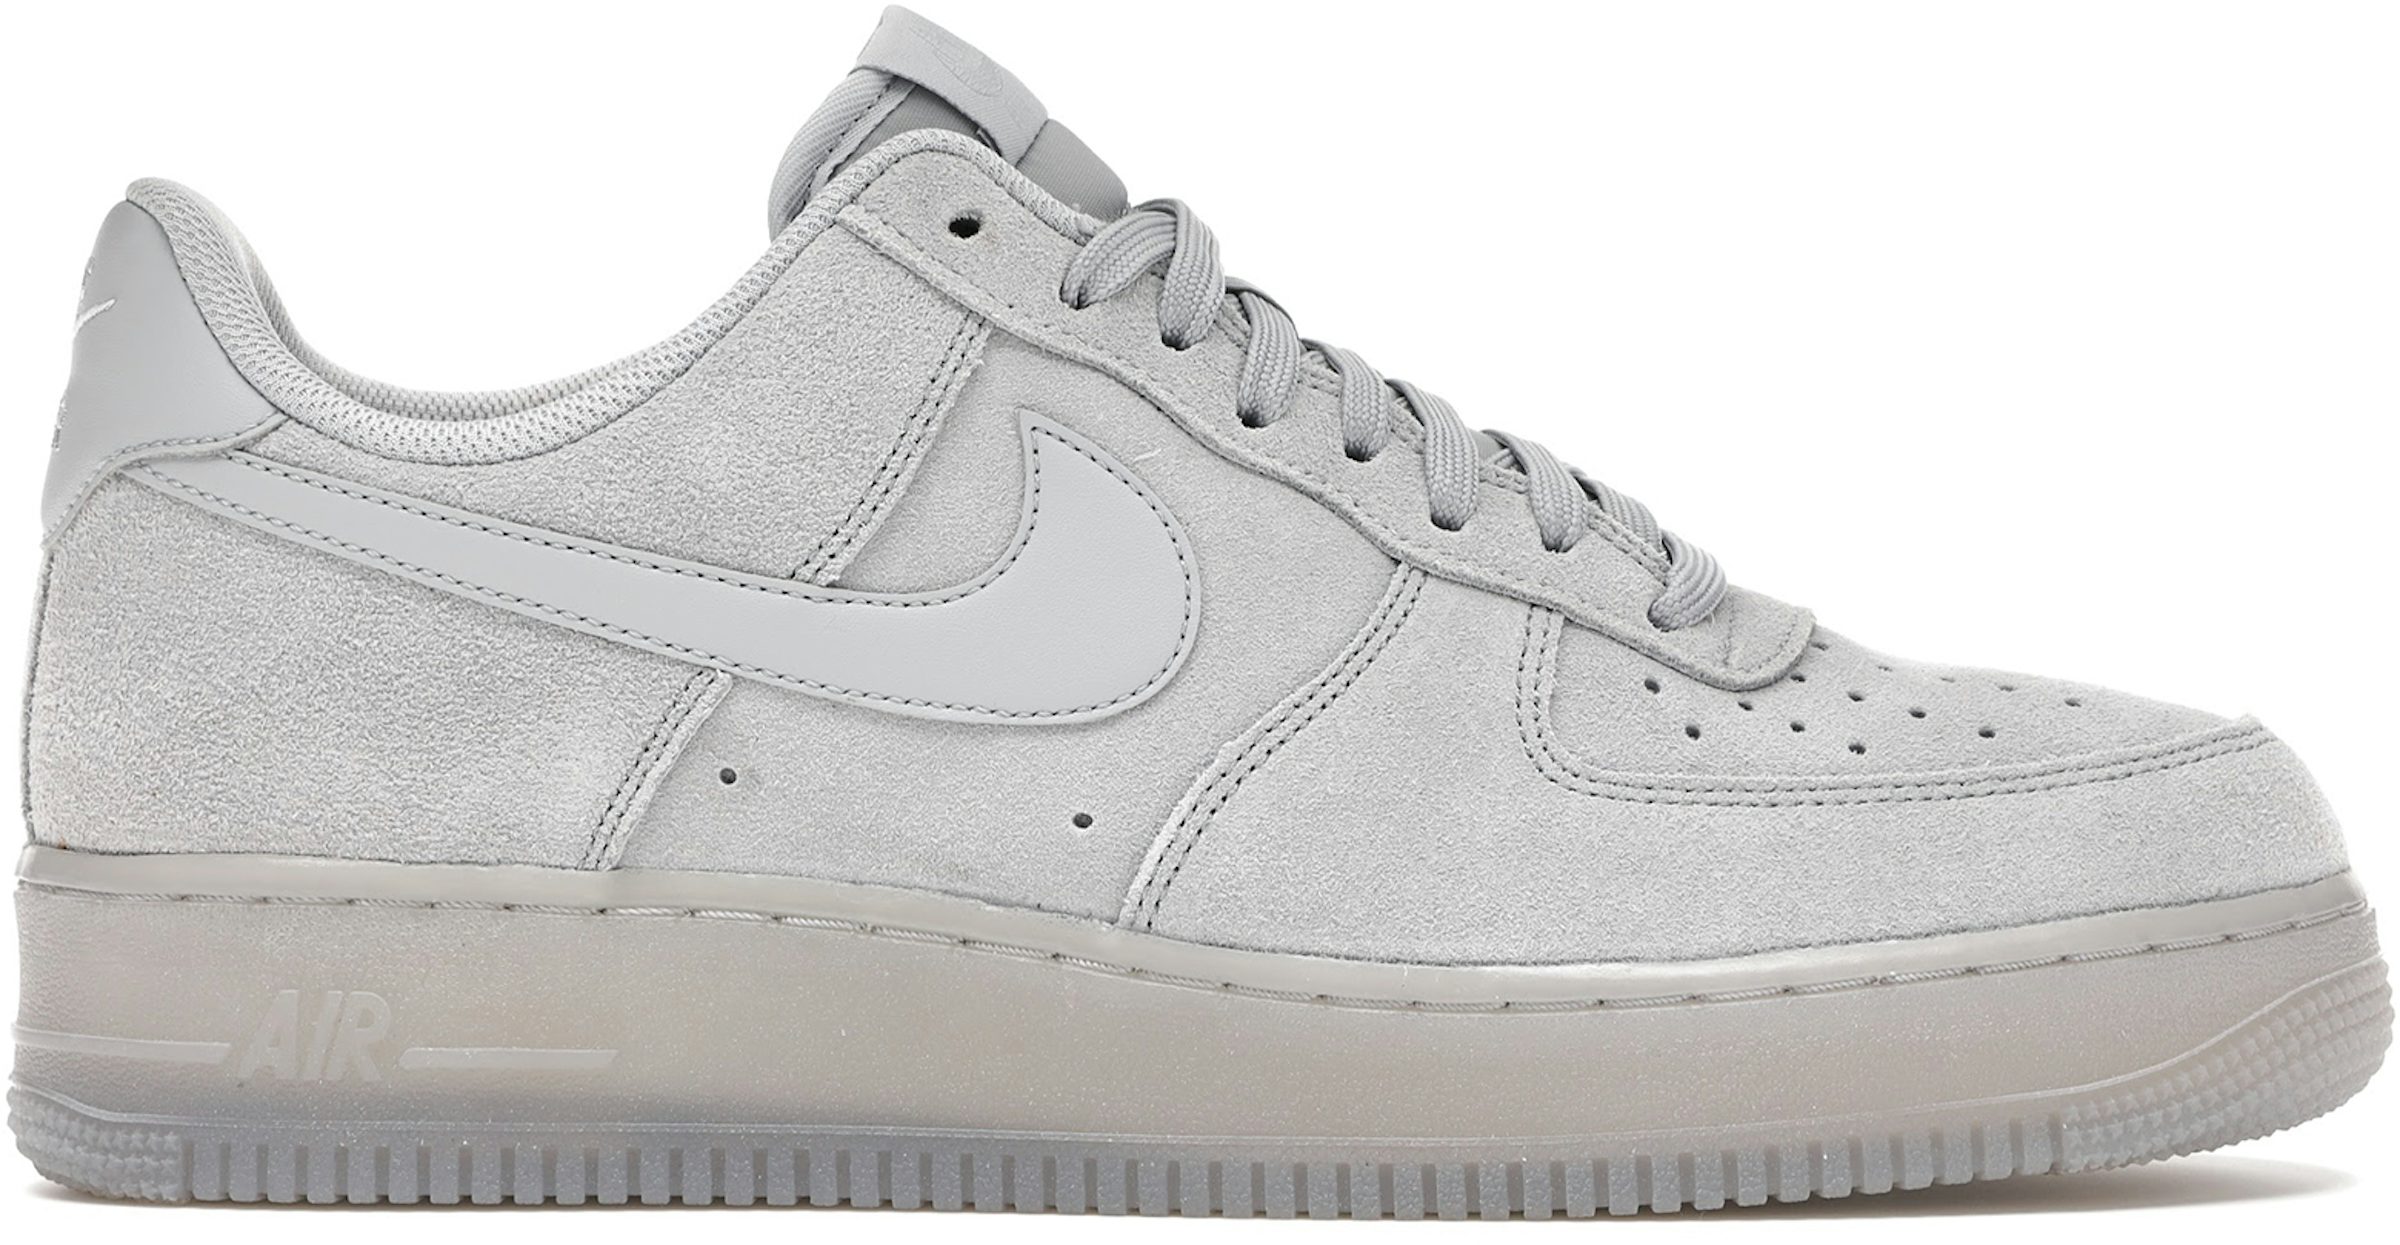 Elevate Your Look With the Nike Air Force 1 '07 LV8 Style Gum Pack